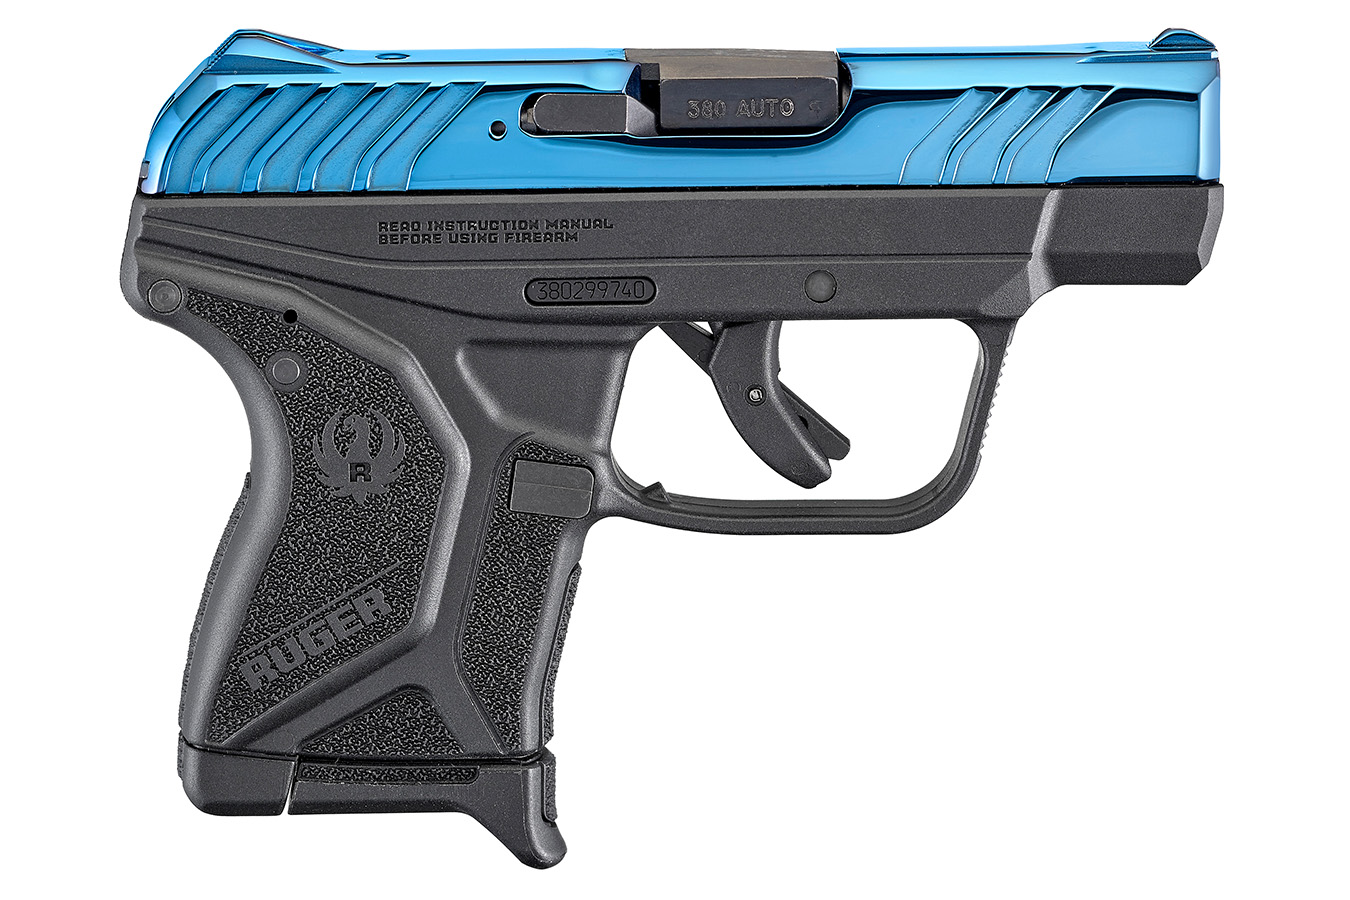 ruger-lcp-380acp-centerfire-pistol-with-viridian-r5-green-laser